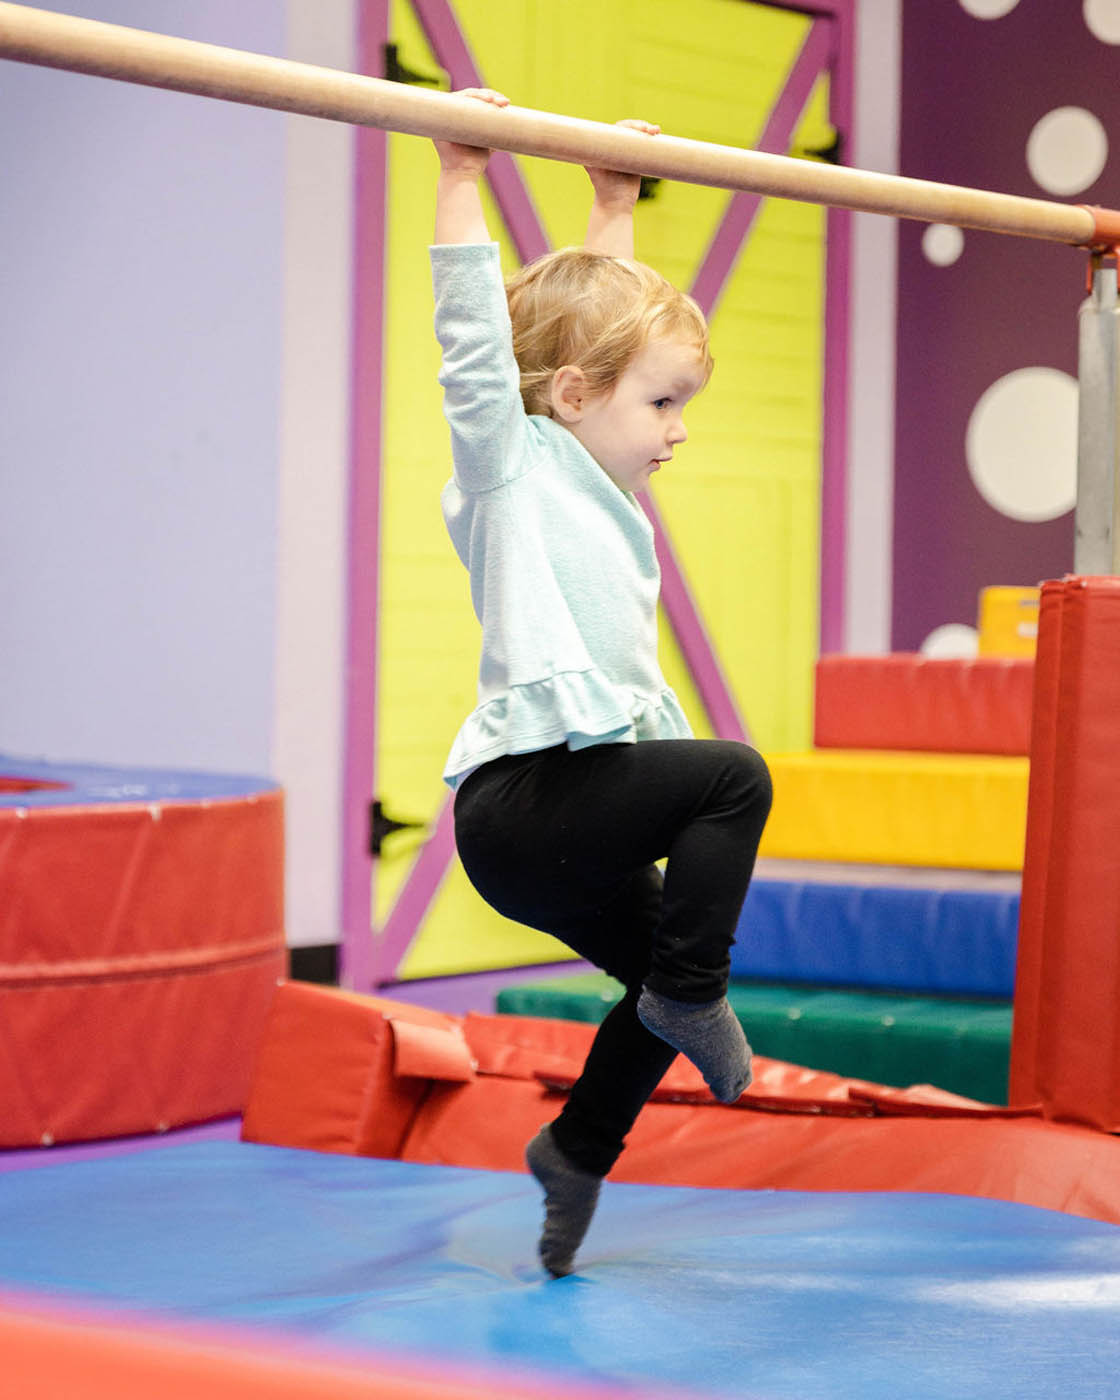 A kid swining from Romp n' Roll gym equipment - safe kids fitness classes in Charlotte, NC.